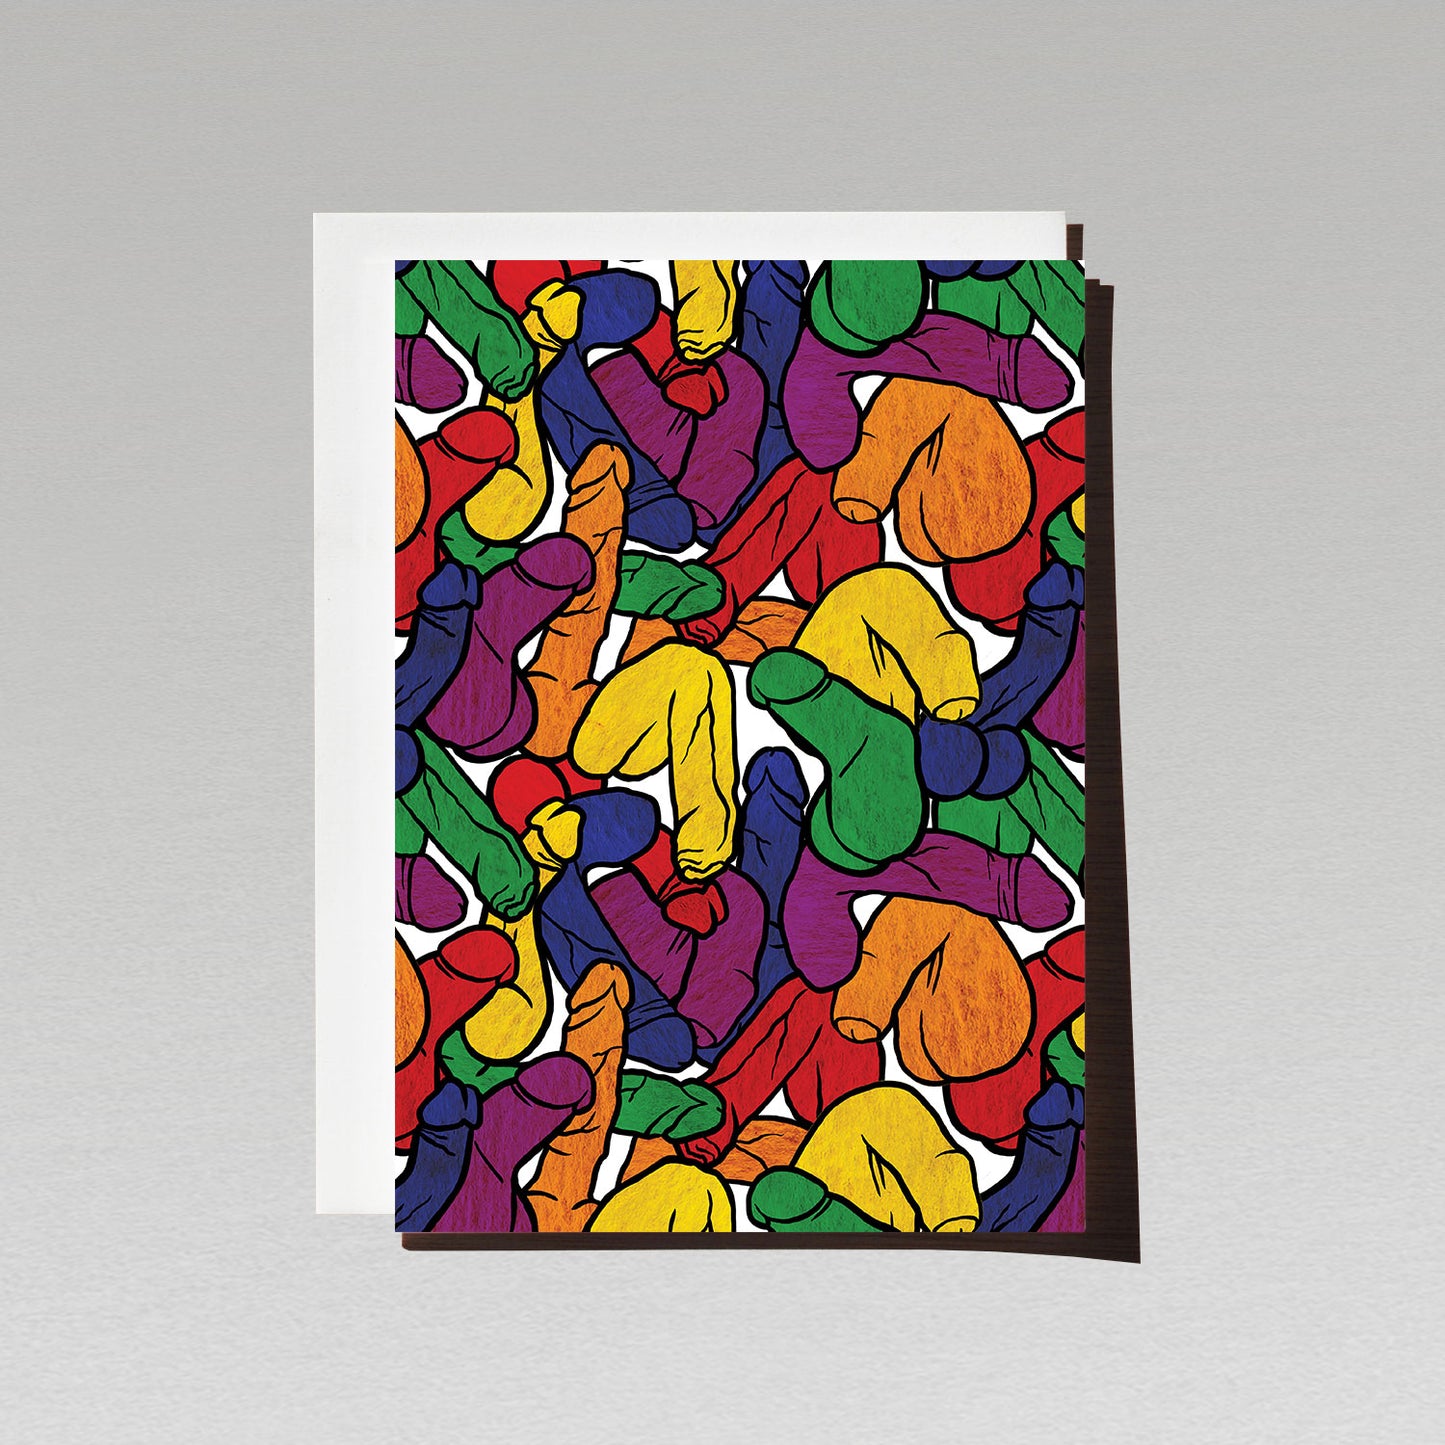 Greeting Card with LGBTQI rainbow flag coloured pattern made of all different illustrated penis shapes and sizes